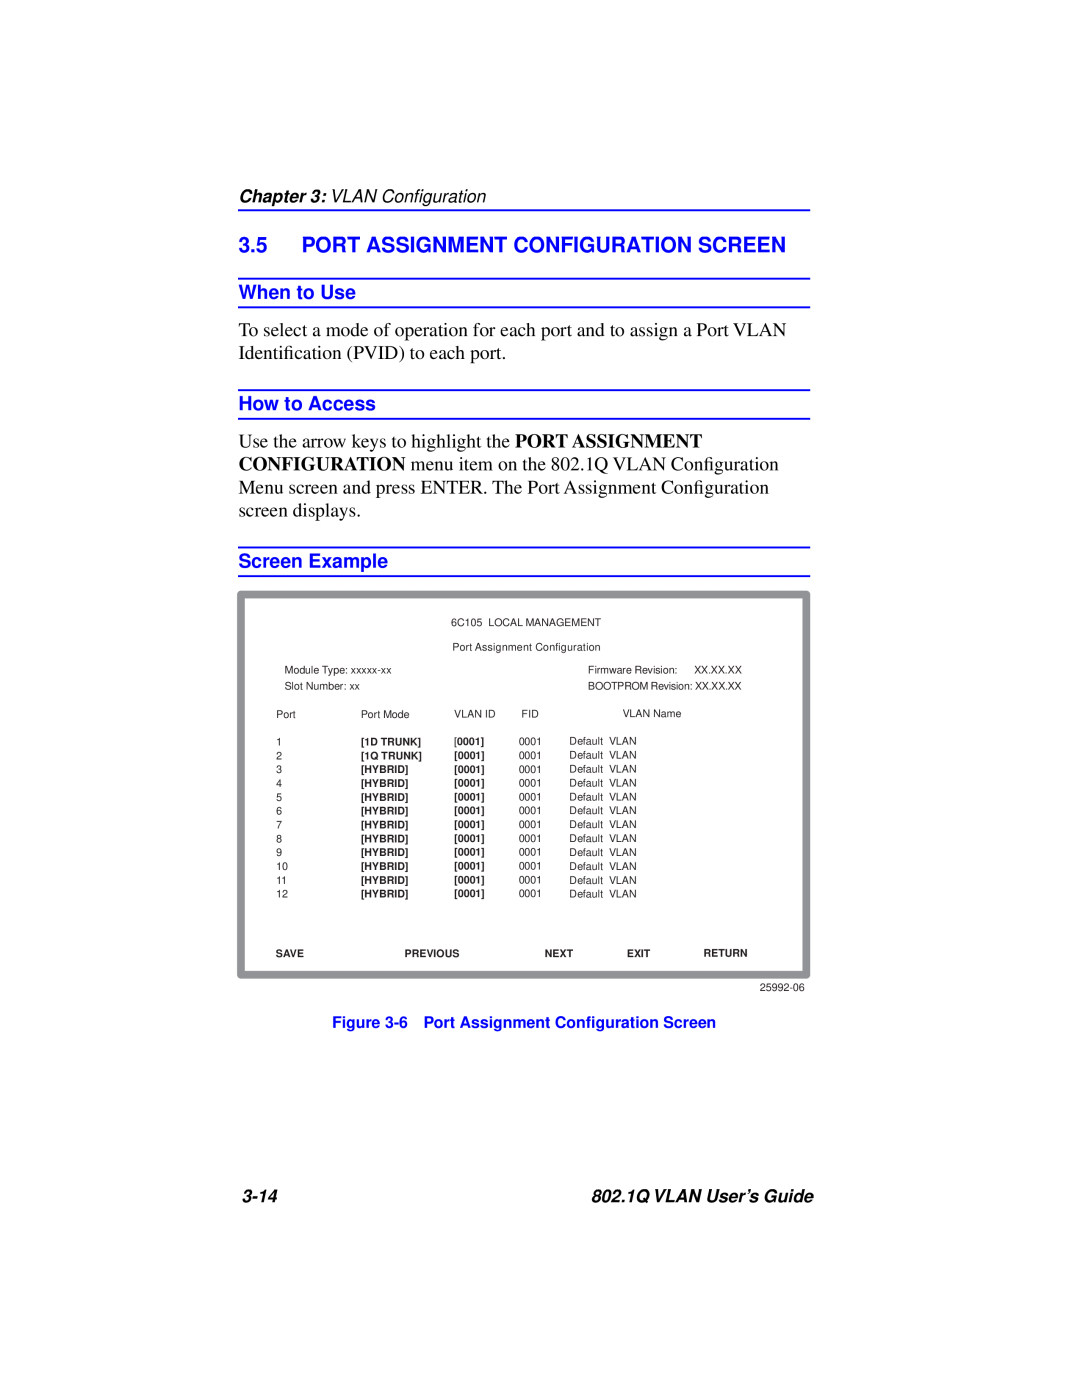 Cabletron Systems 802.1Q manual Port Assignment Configuration Screen, When to Use, How to Access, Screen Example 